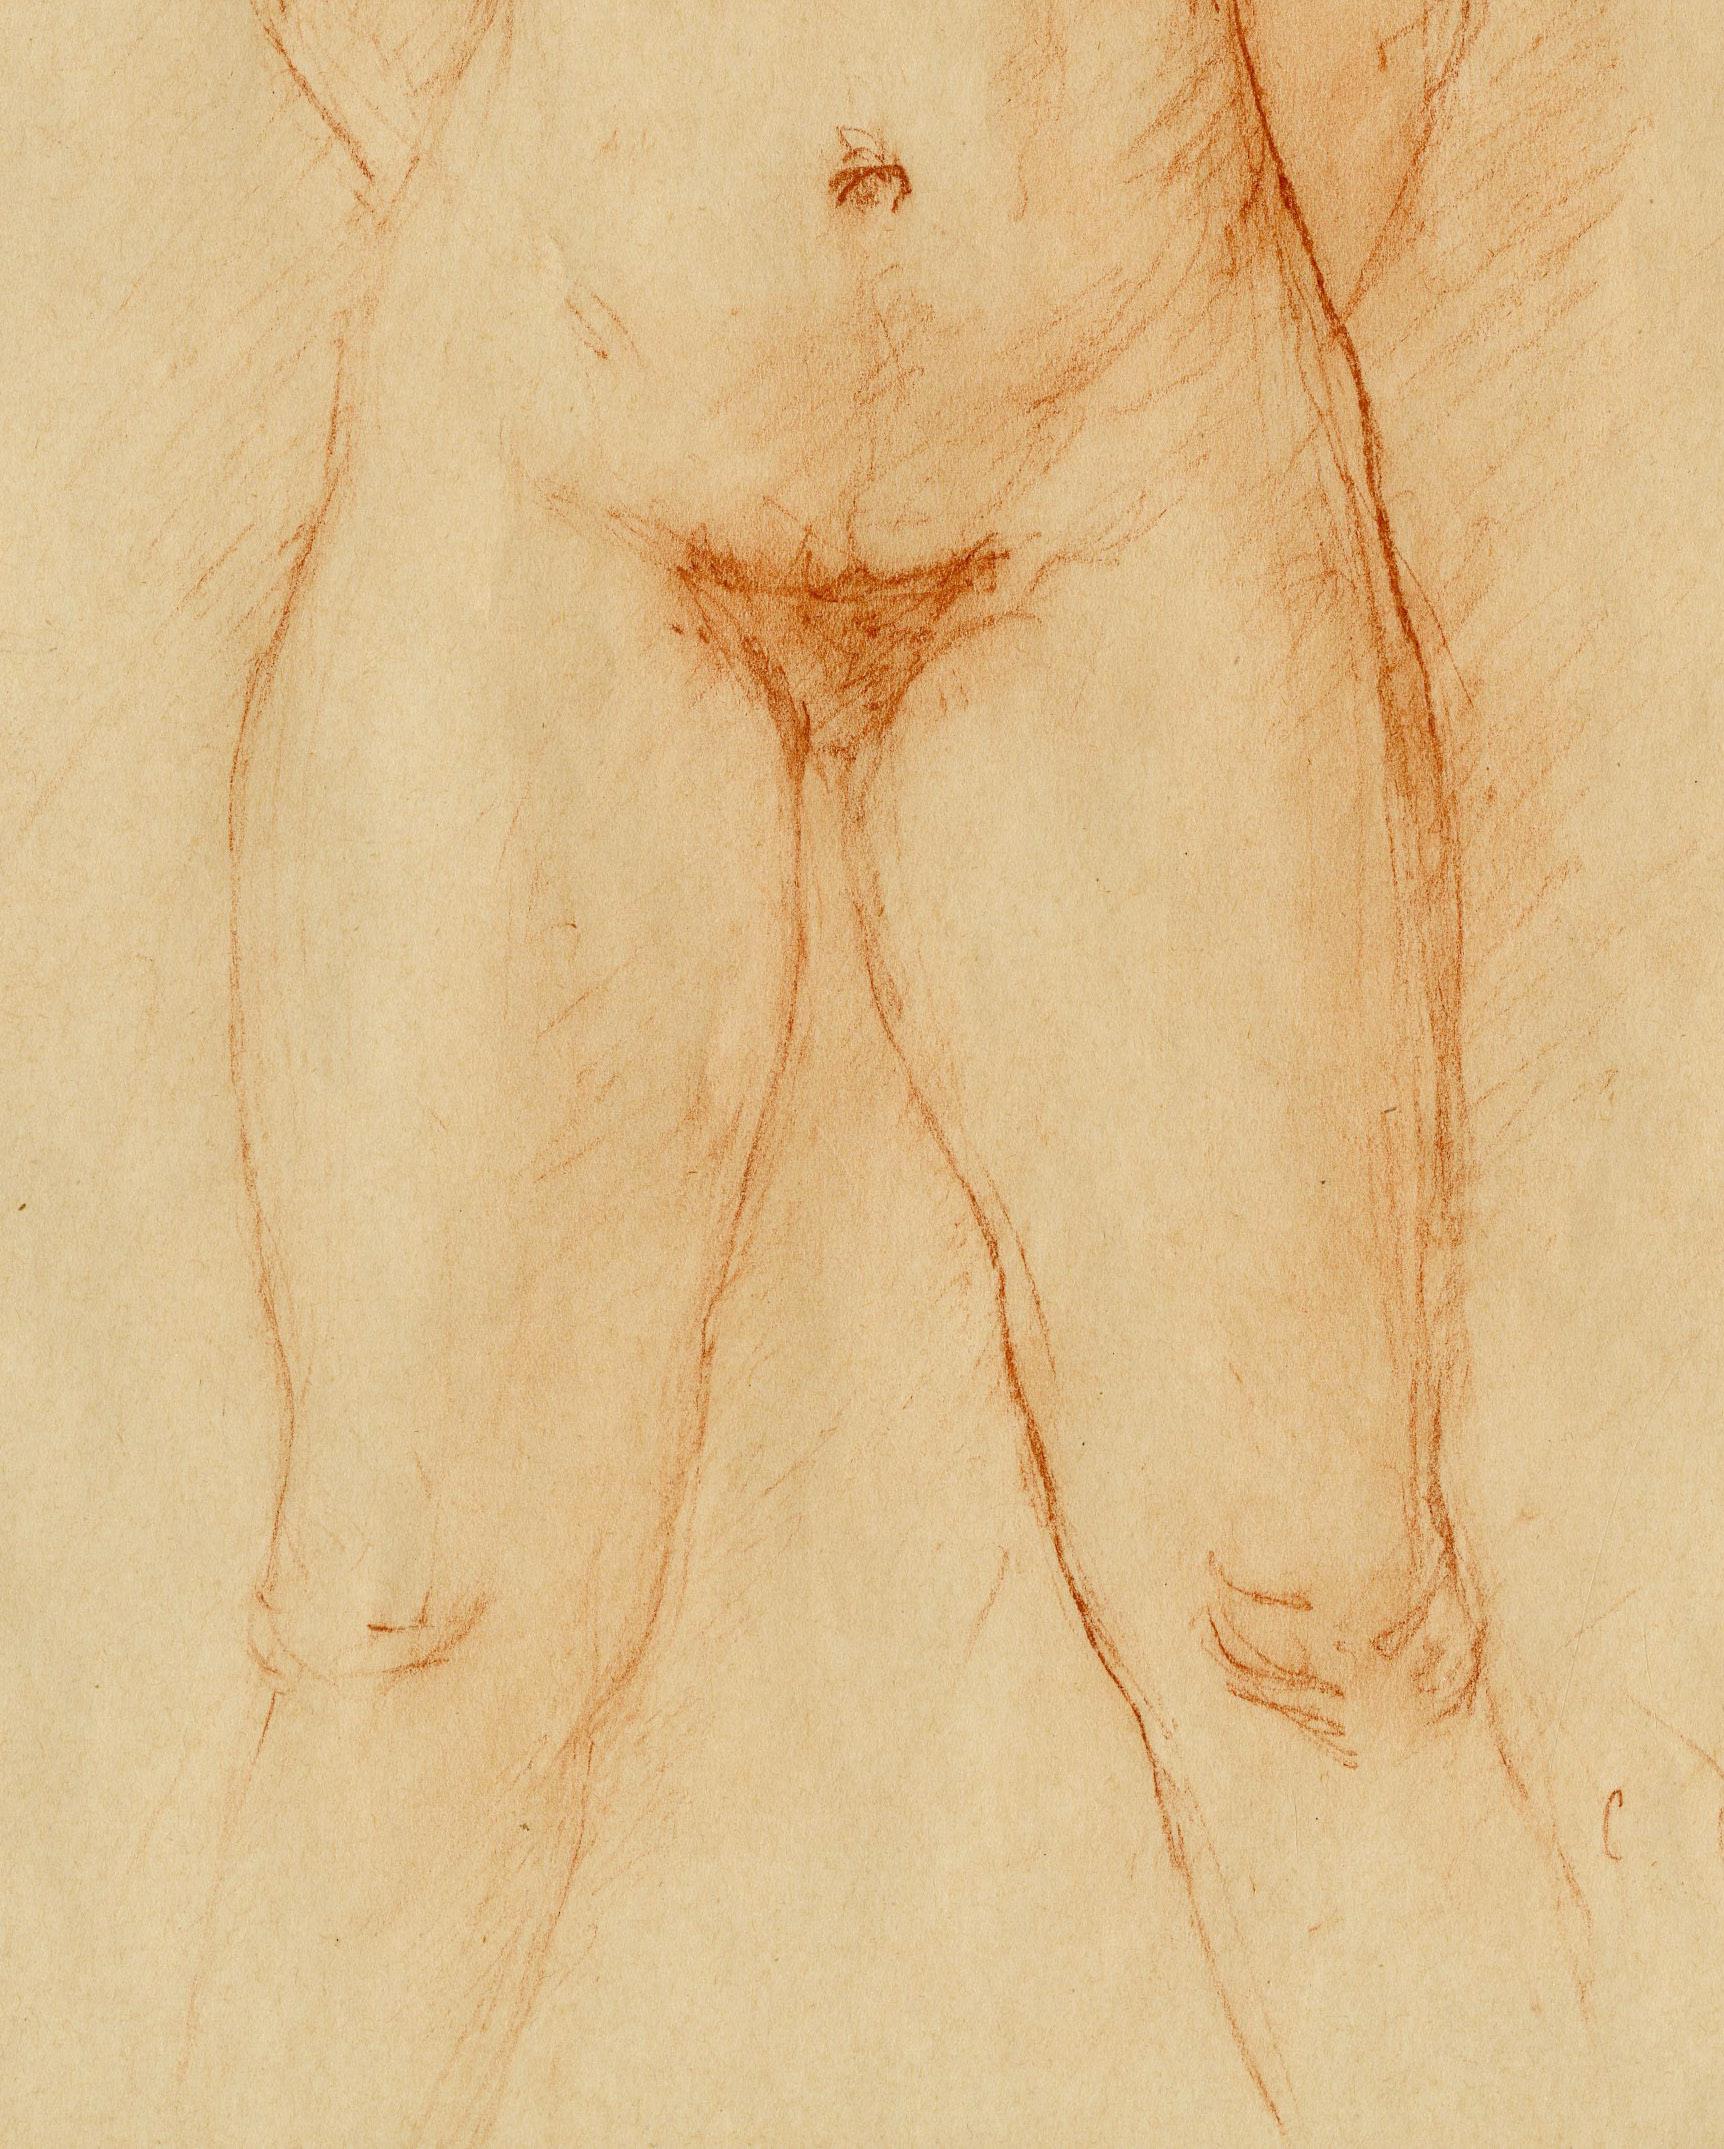 Nu (Standing Female Nude)
Red chalk on wove paper, c. 1925
Signed lower right: C Despaiu (see photo)
Sheet size (folded format): 12 1/8 x 8 5/16 inches
Condition: Very good
Sheet folded in 1/2 prior to creation of this drawing on 1/2 of the